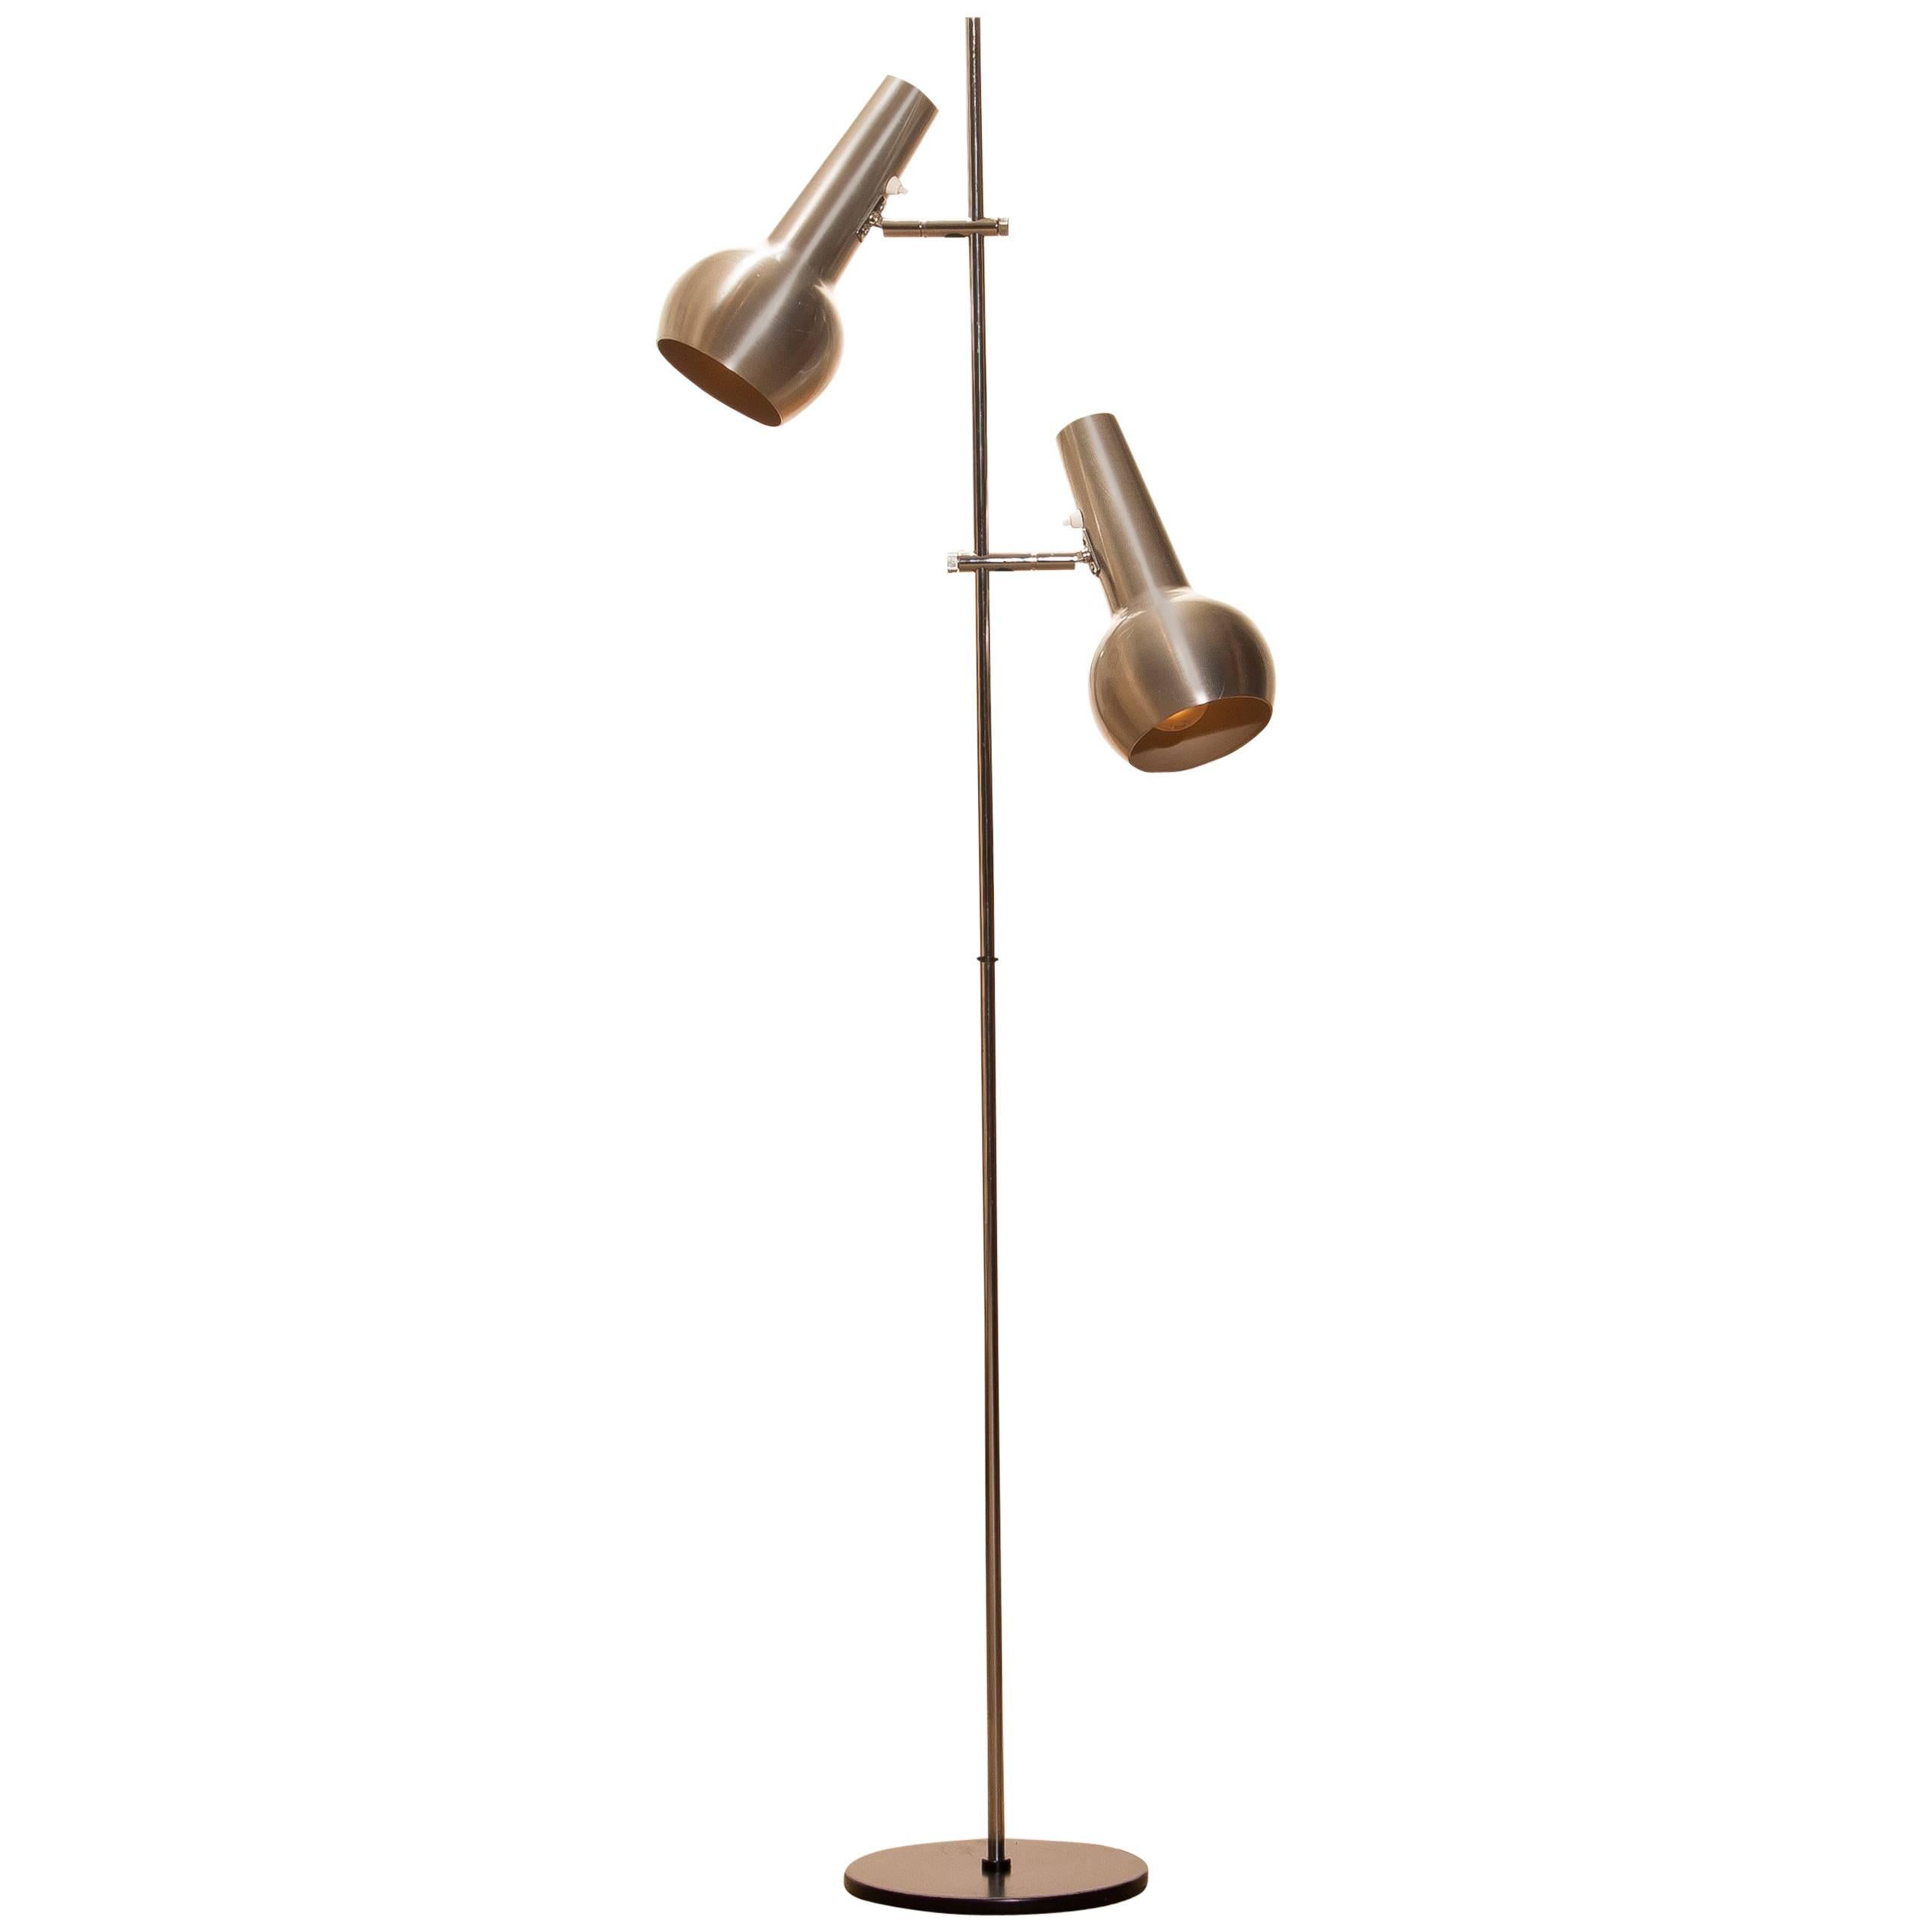 Chrome and Aluminium Double Shade Floor Lamp by Koch & Lowy from the 1970s, US